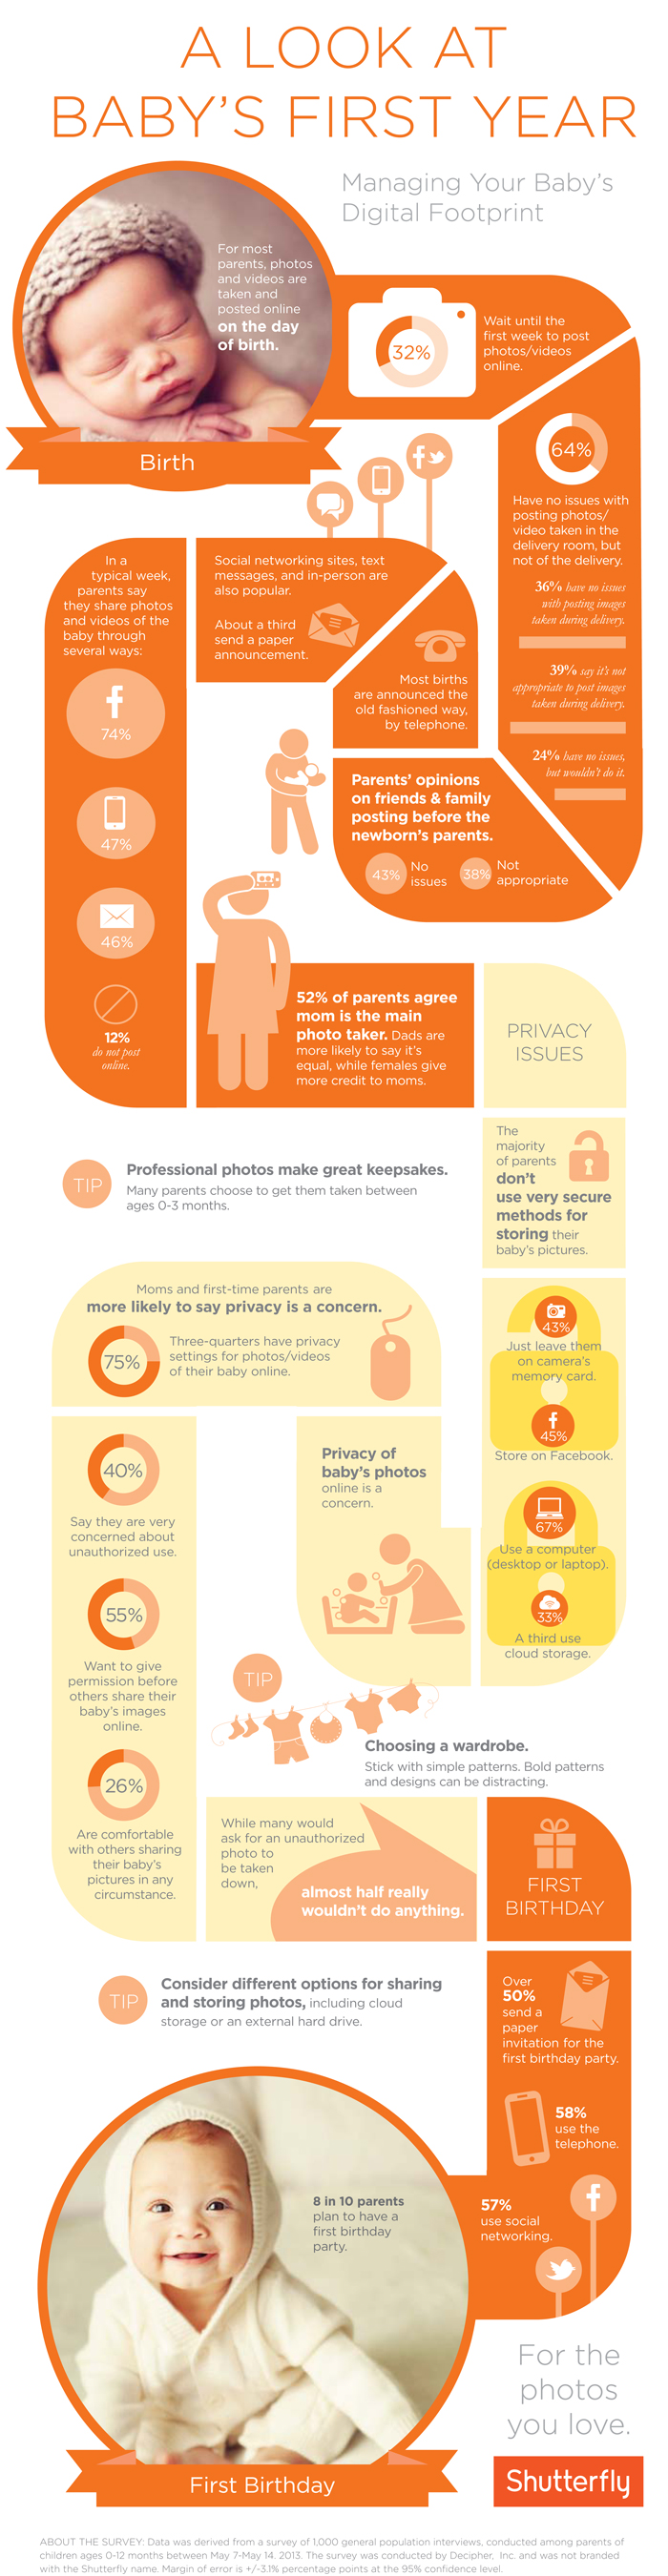 Shutterfly Baby Infographic